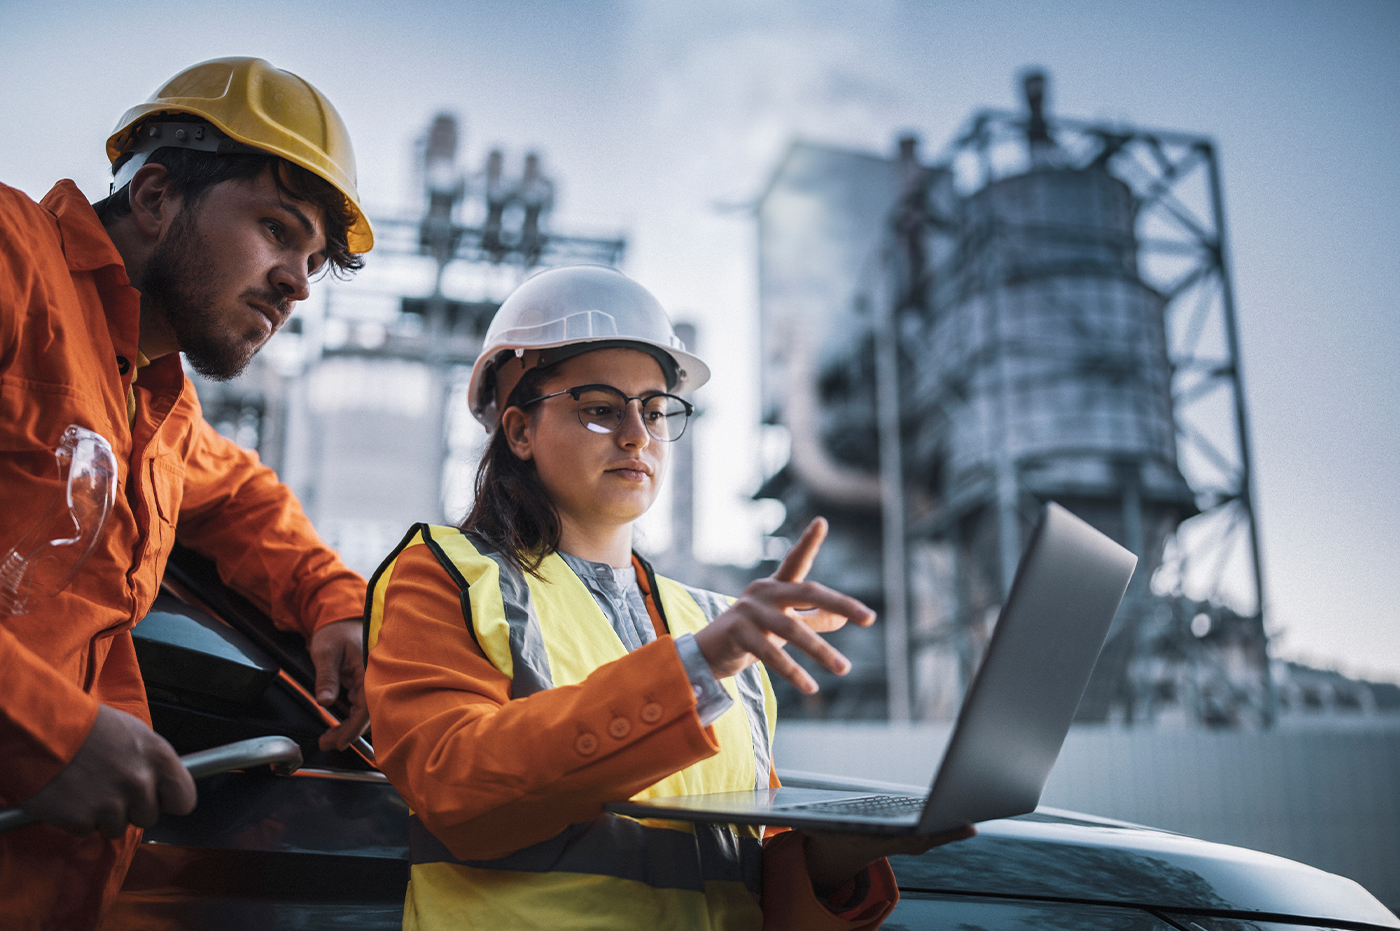 Man and woman workers in hard hats looking at a laptop on a power grid site